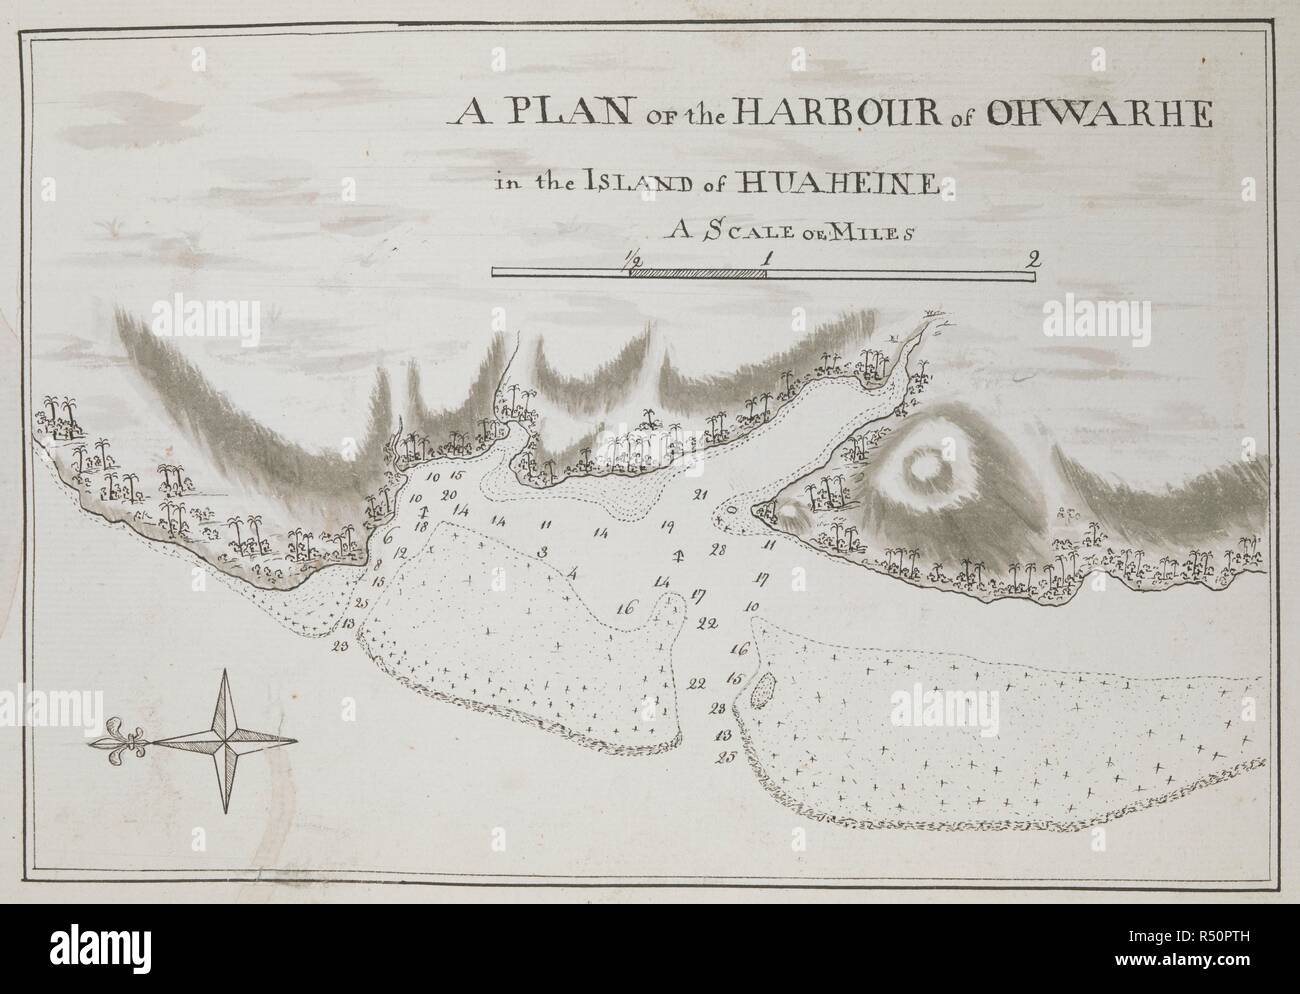 Plan of the Harbour of Ohwarhe, in the Island of Hooaheine; drawn by Lieut. James Cook, in his first voyage, on a scale of 2 inches to a mile. Charts, Plans, Views, and Drawings taken on board the Endeavour during Captain Cook's First Voyage, 1768-1771. July, 1769. Source: Add. 7085, No.14. Stock Photo